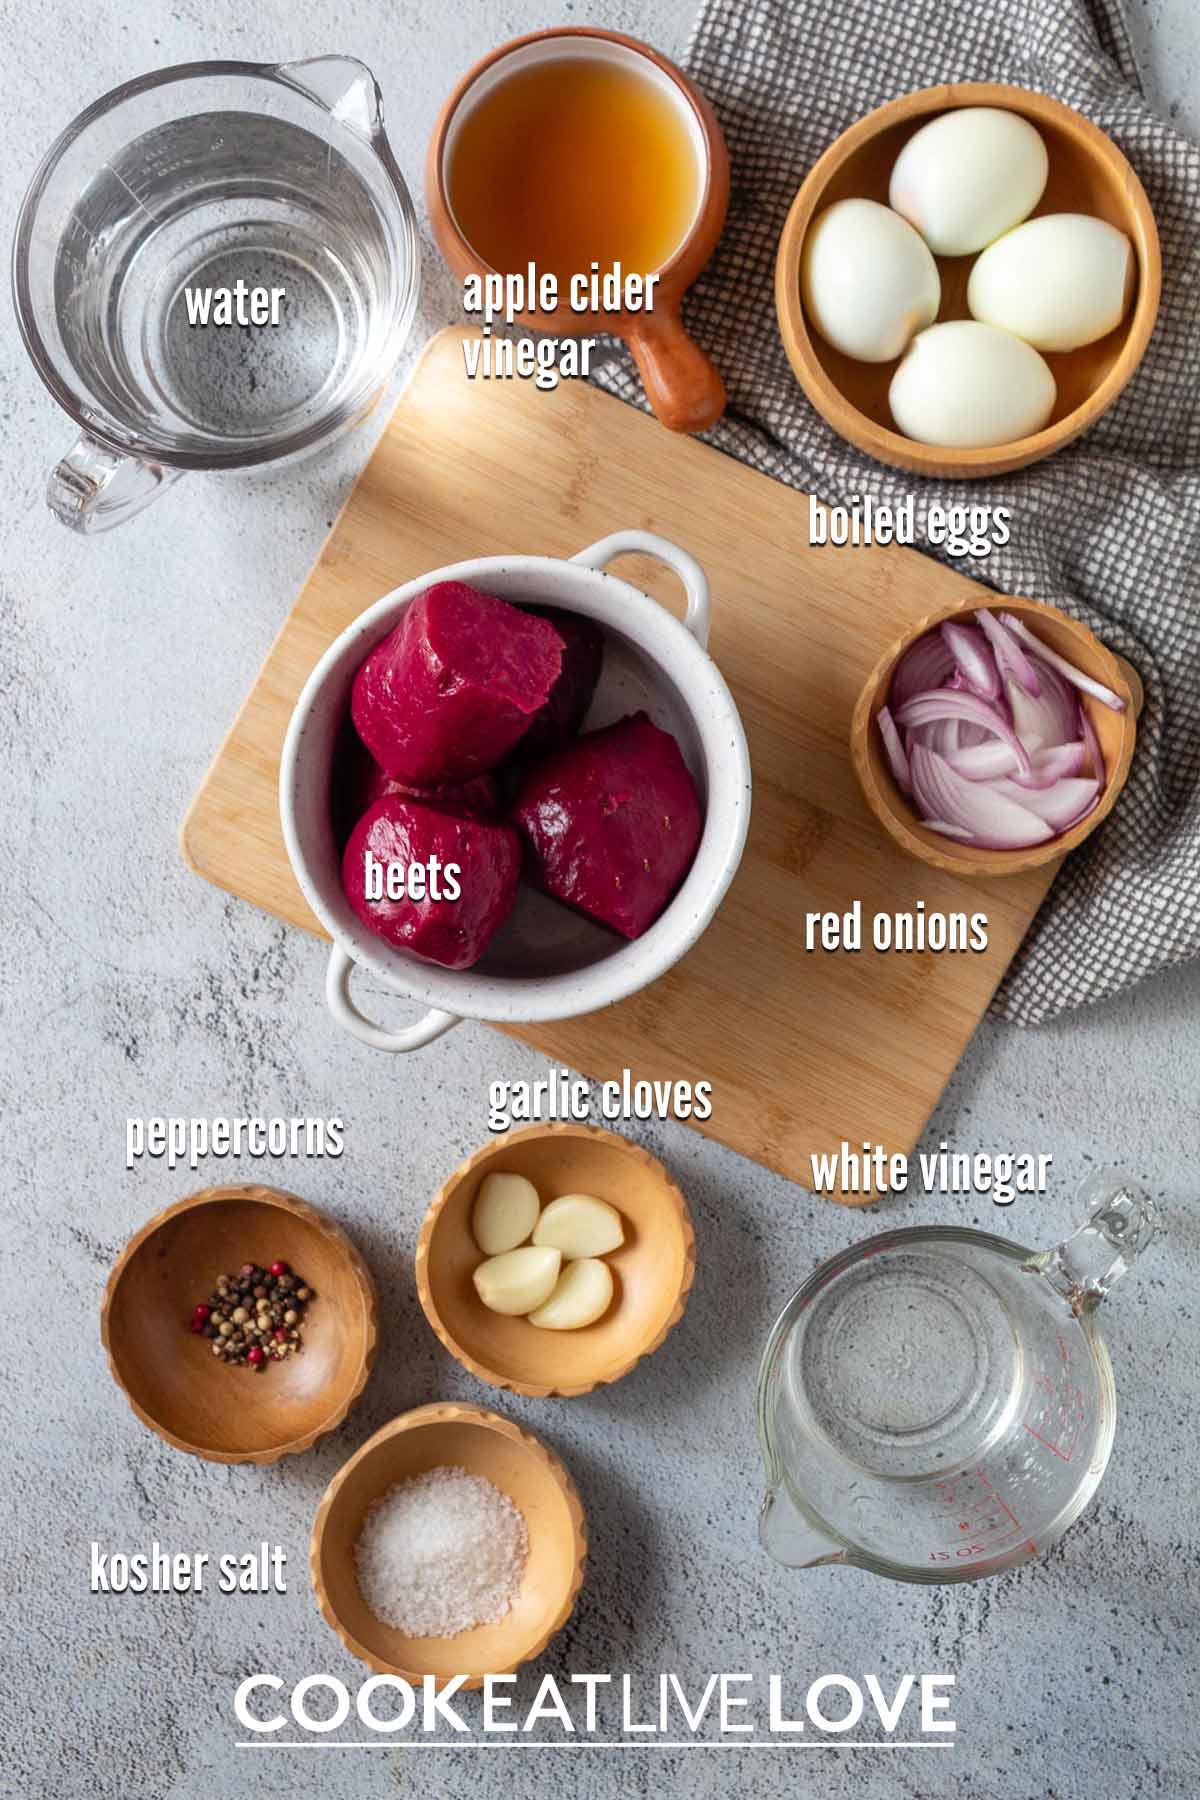 Ingredients to make pickled beets without sugar on the table.